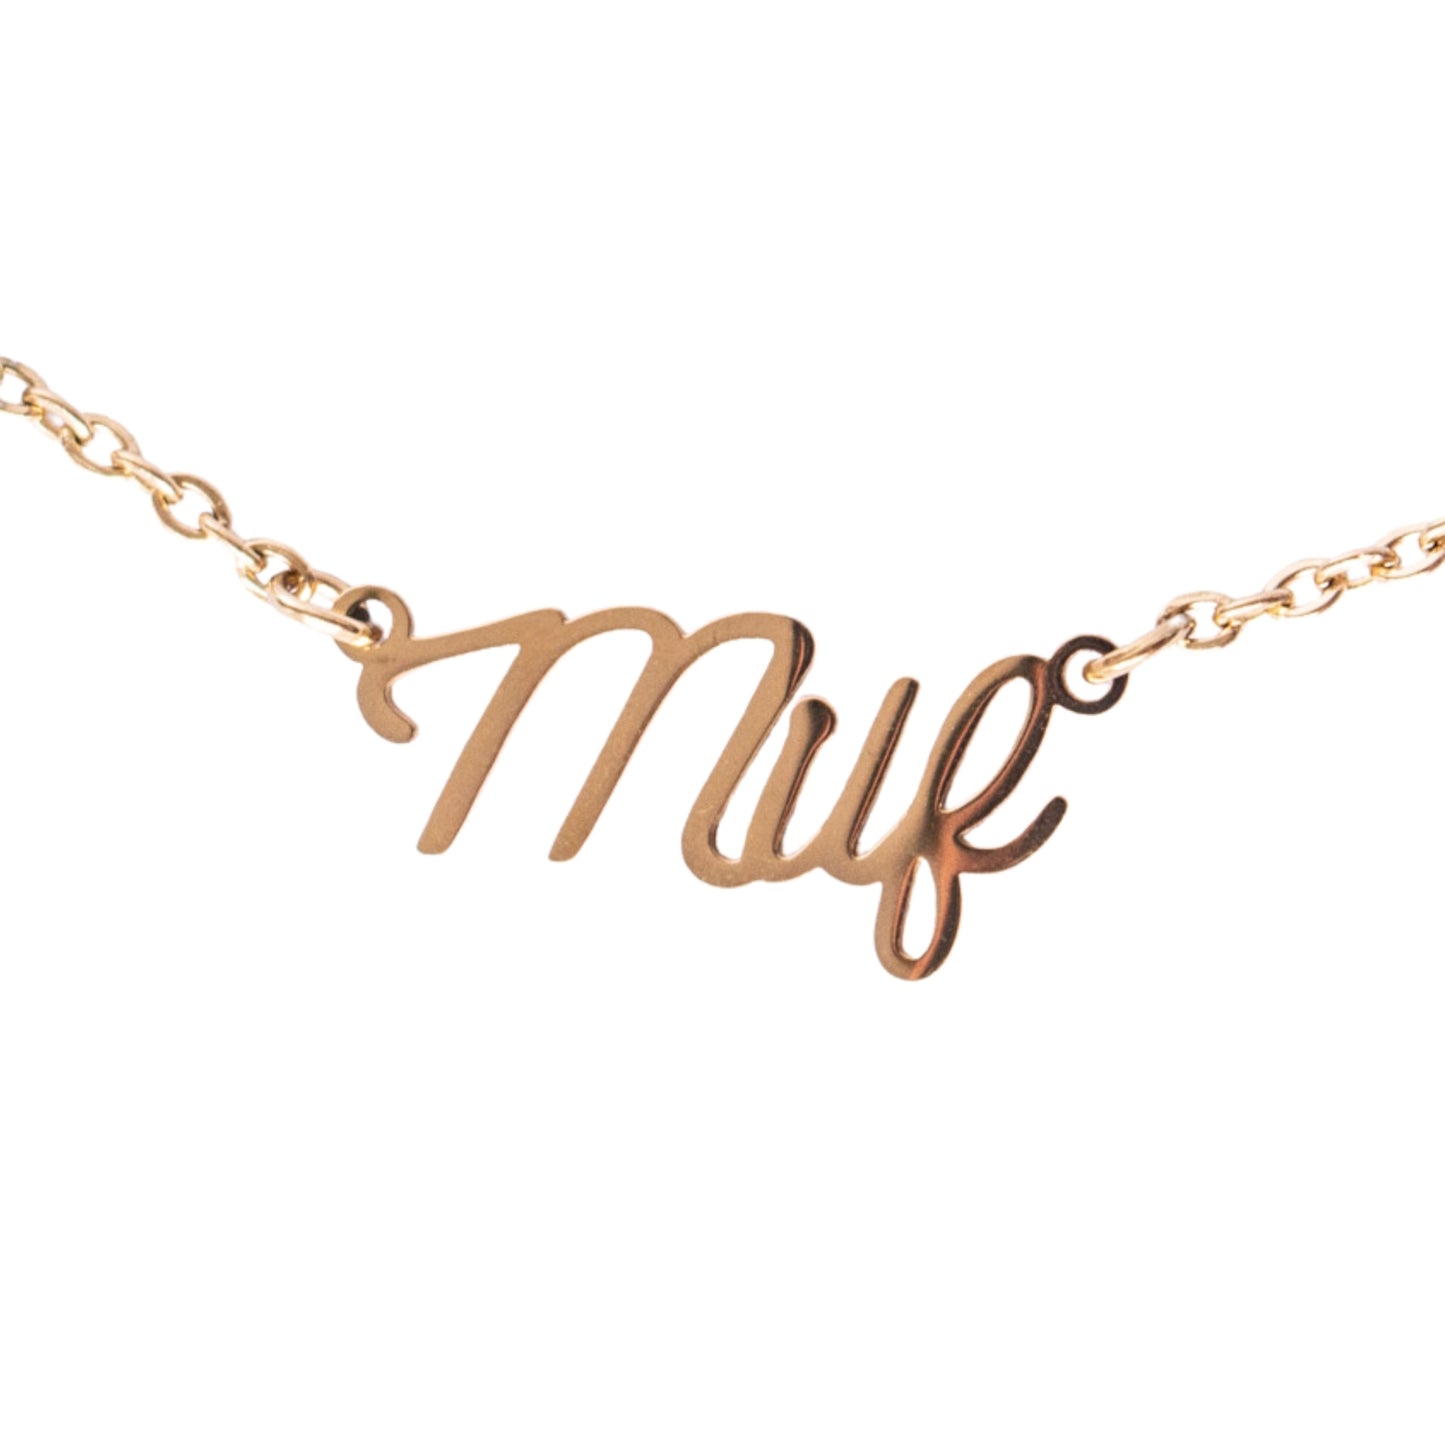 Milf necklace in gold